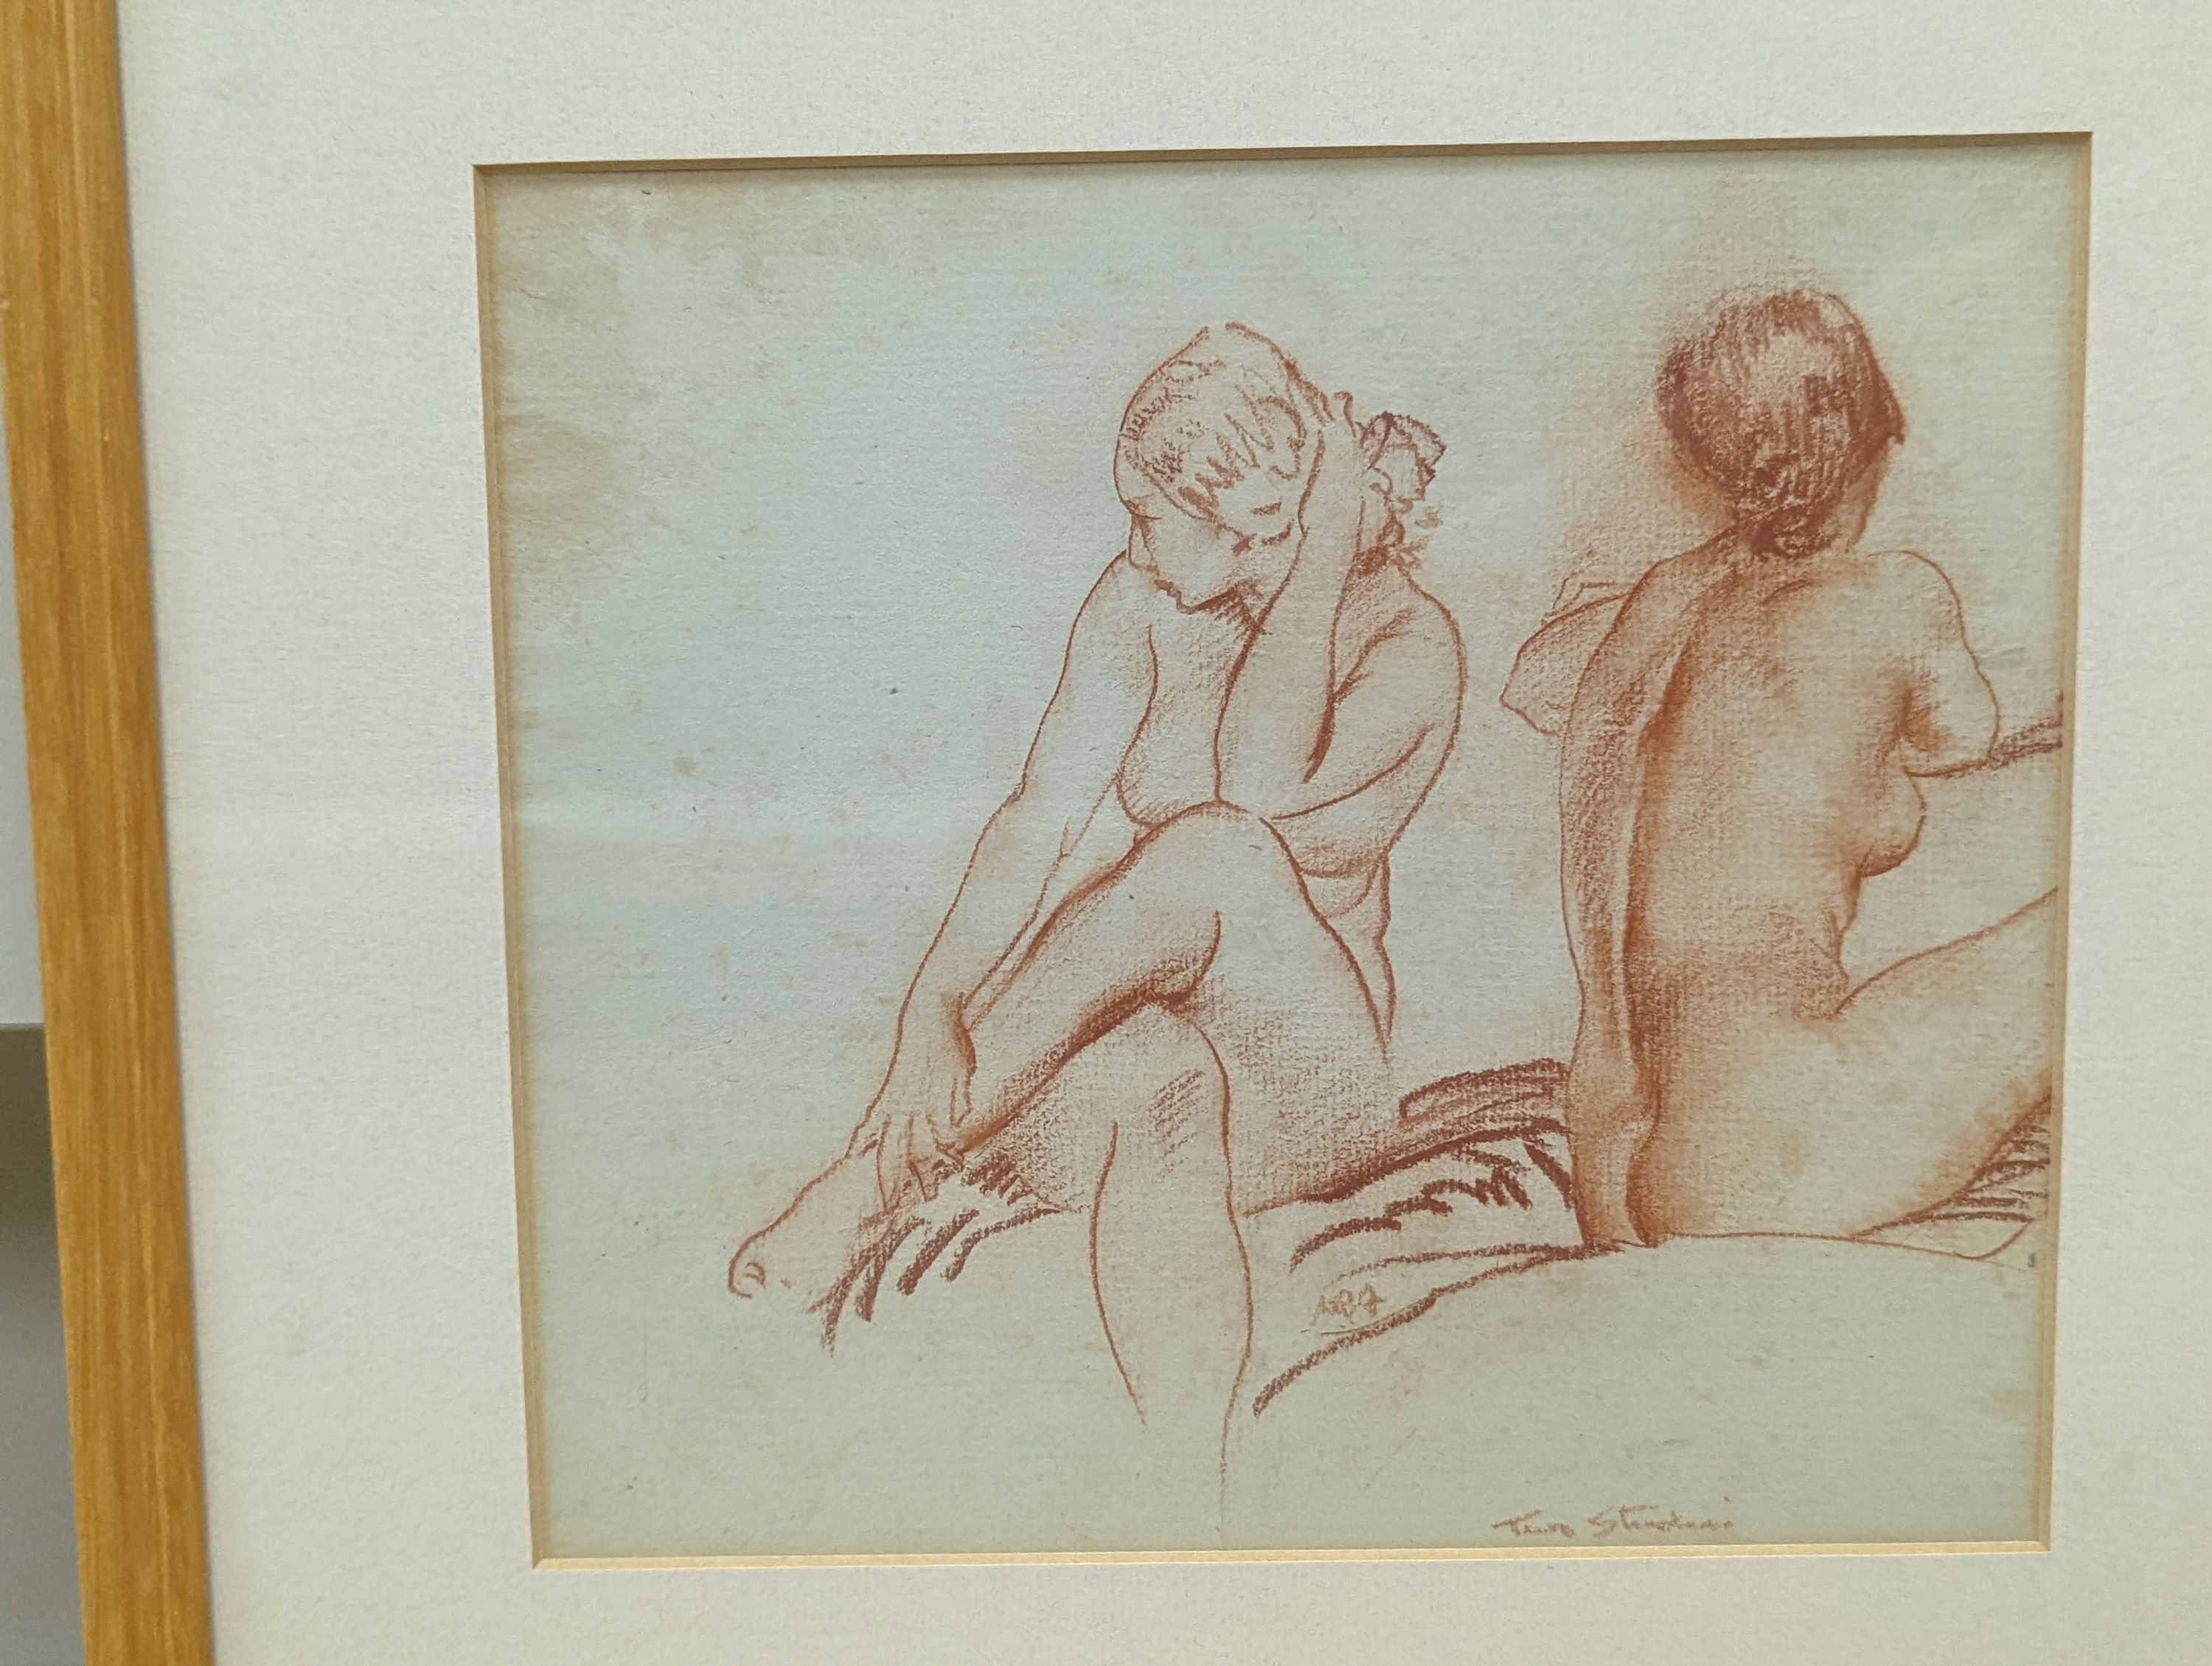 Sir William Russell Flint (1880-1969), Three studies of models, one inscribed 'Two Studies', conte crayon, largest 19 x 21cm